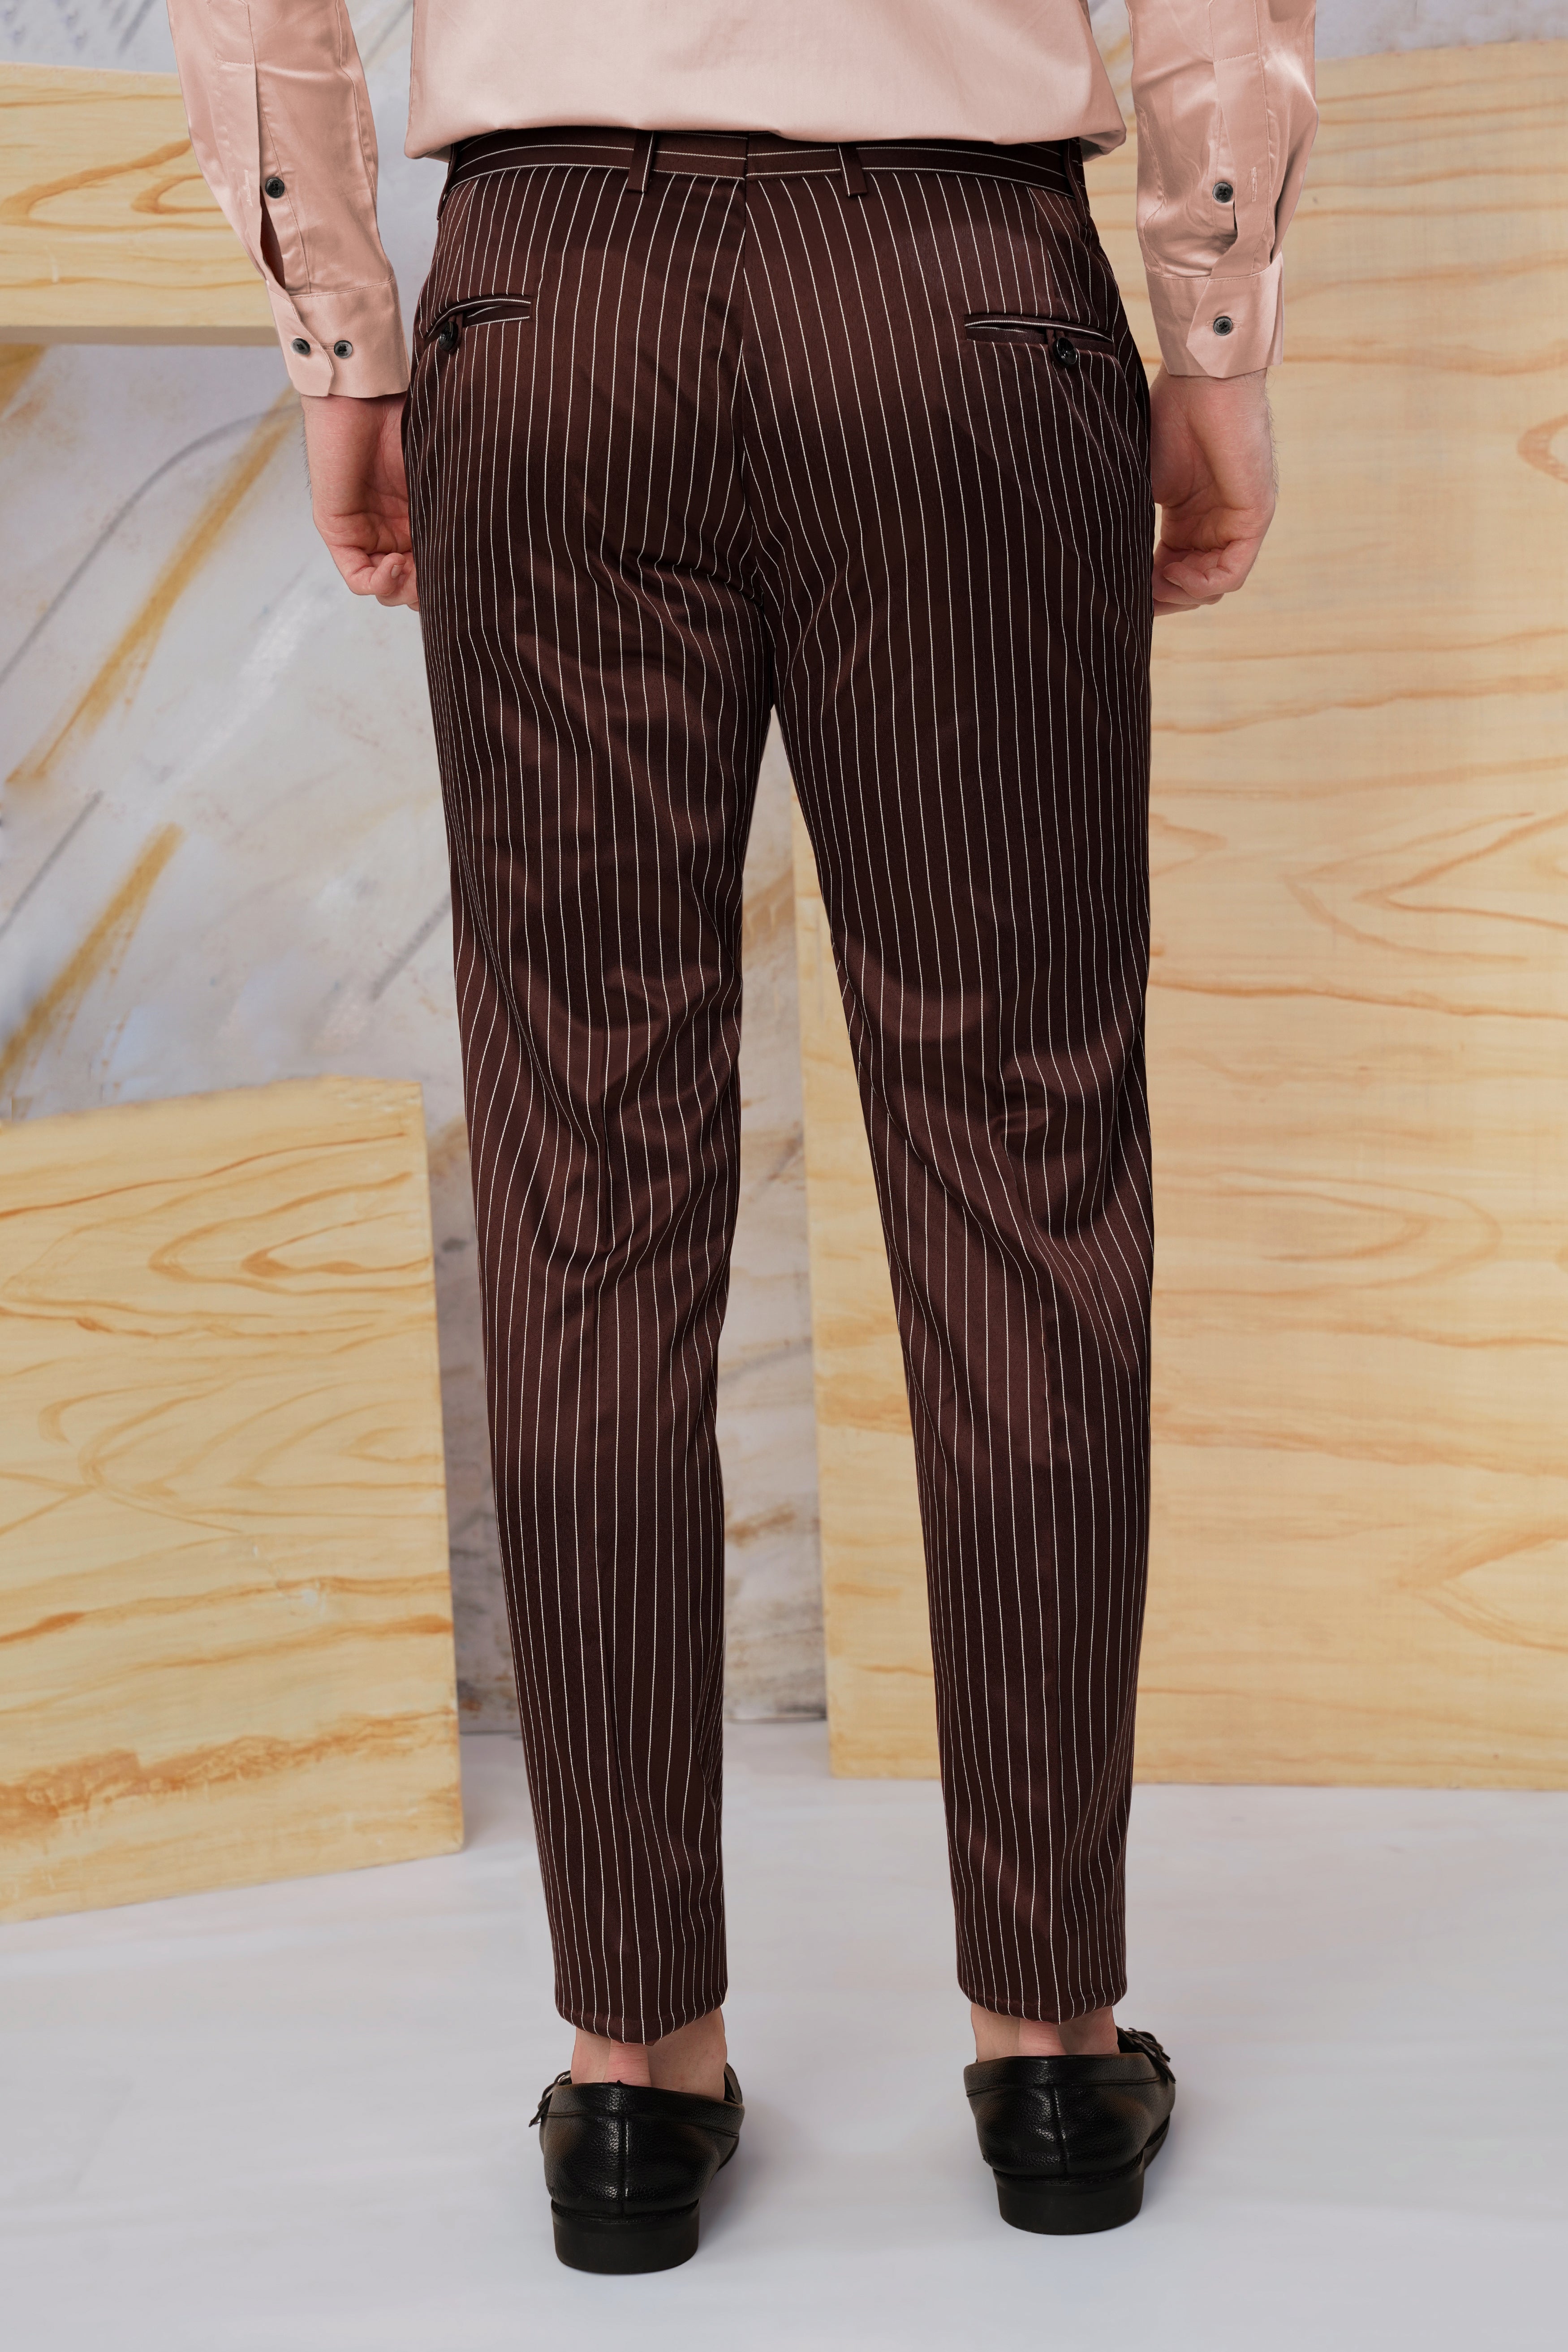 Haggar Pants Mens Double Knit Polyester Striped Suit Brown 33 x 31.5 vtg  1960s | eBay